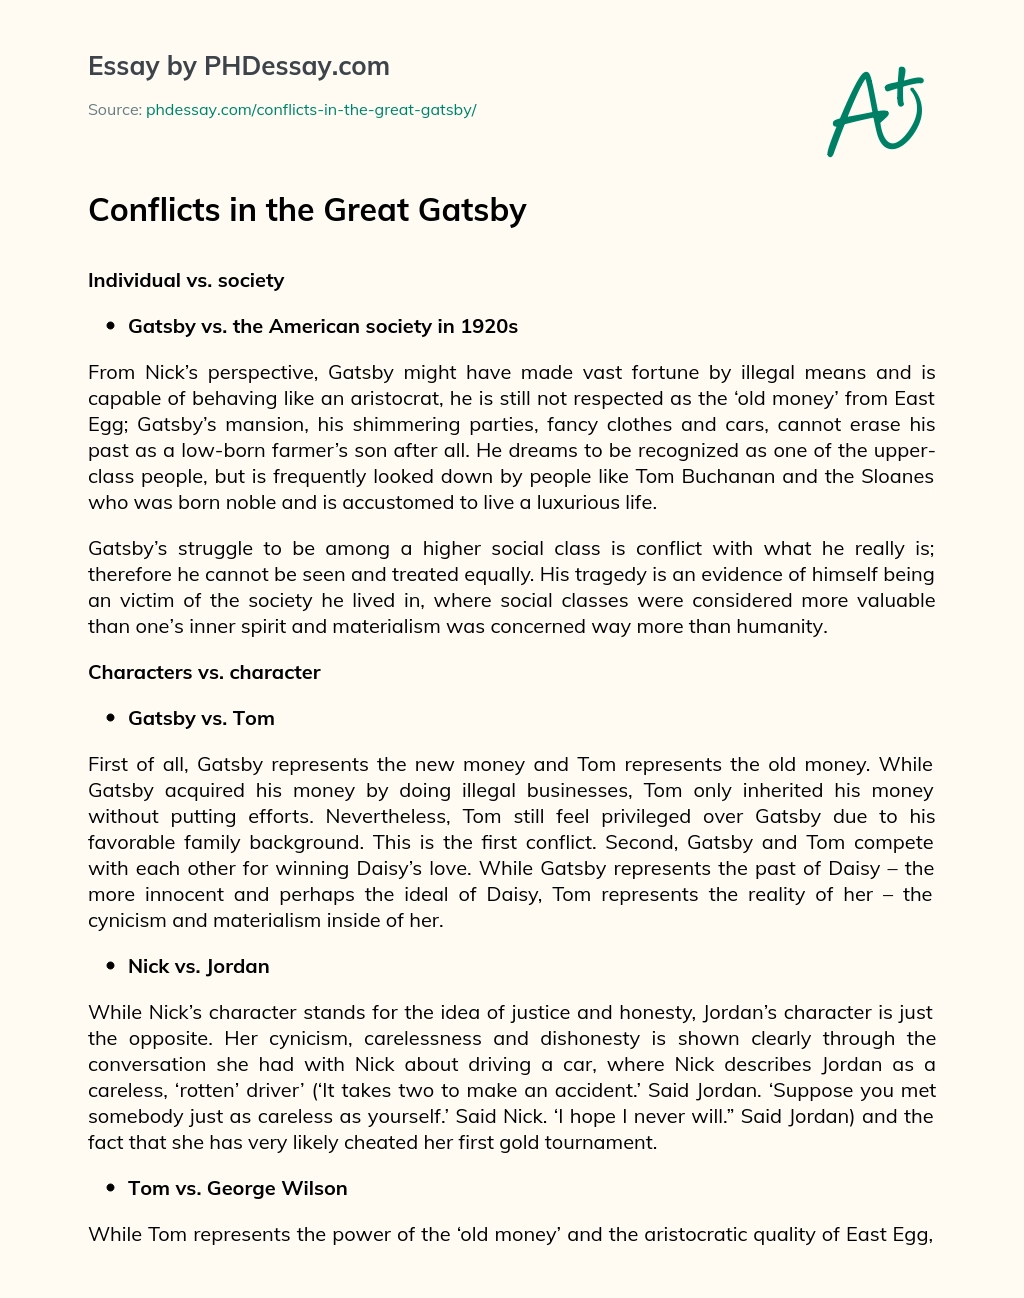 Conflicts in the Great Gatsby essay